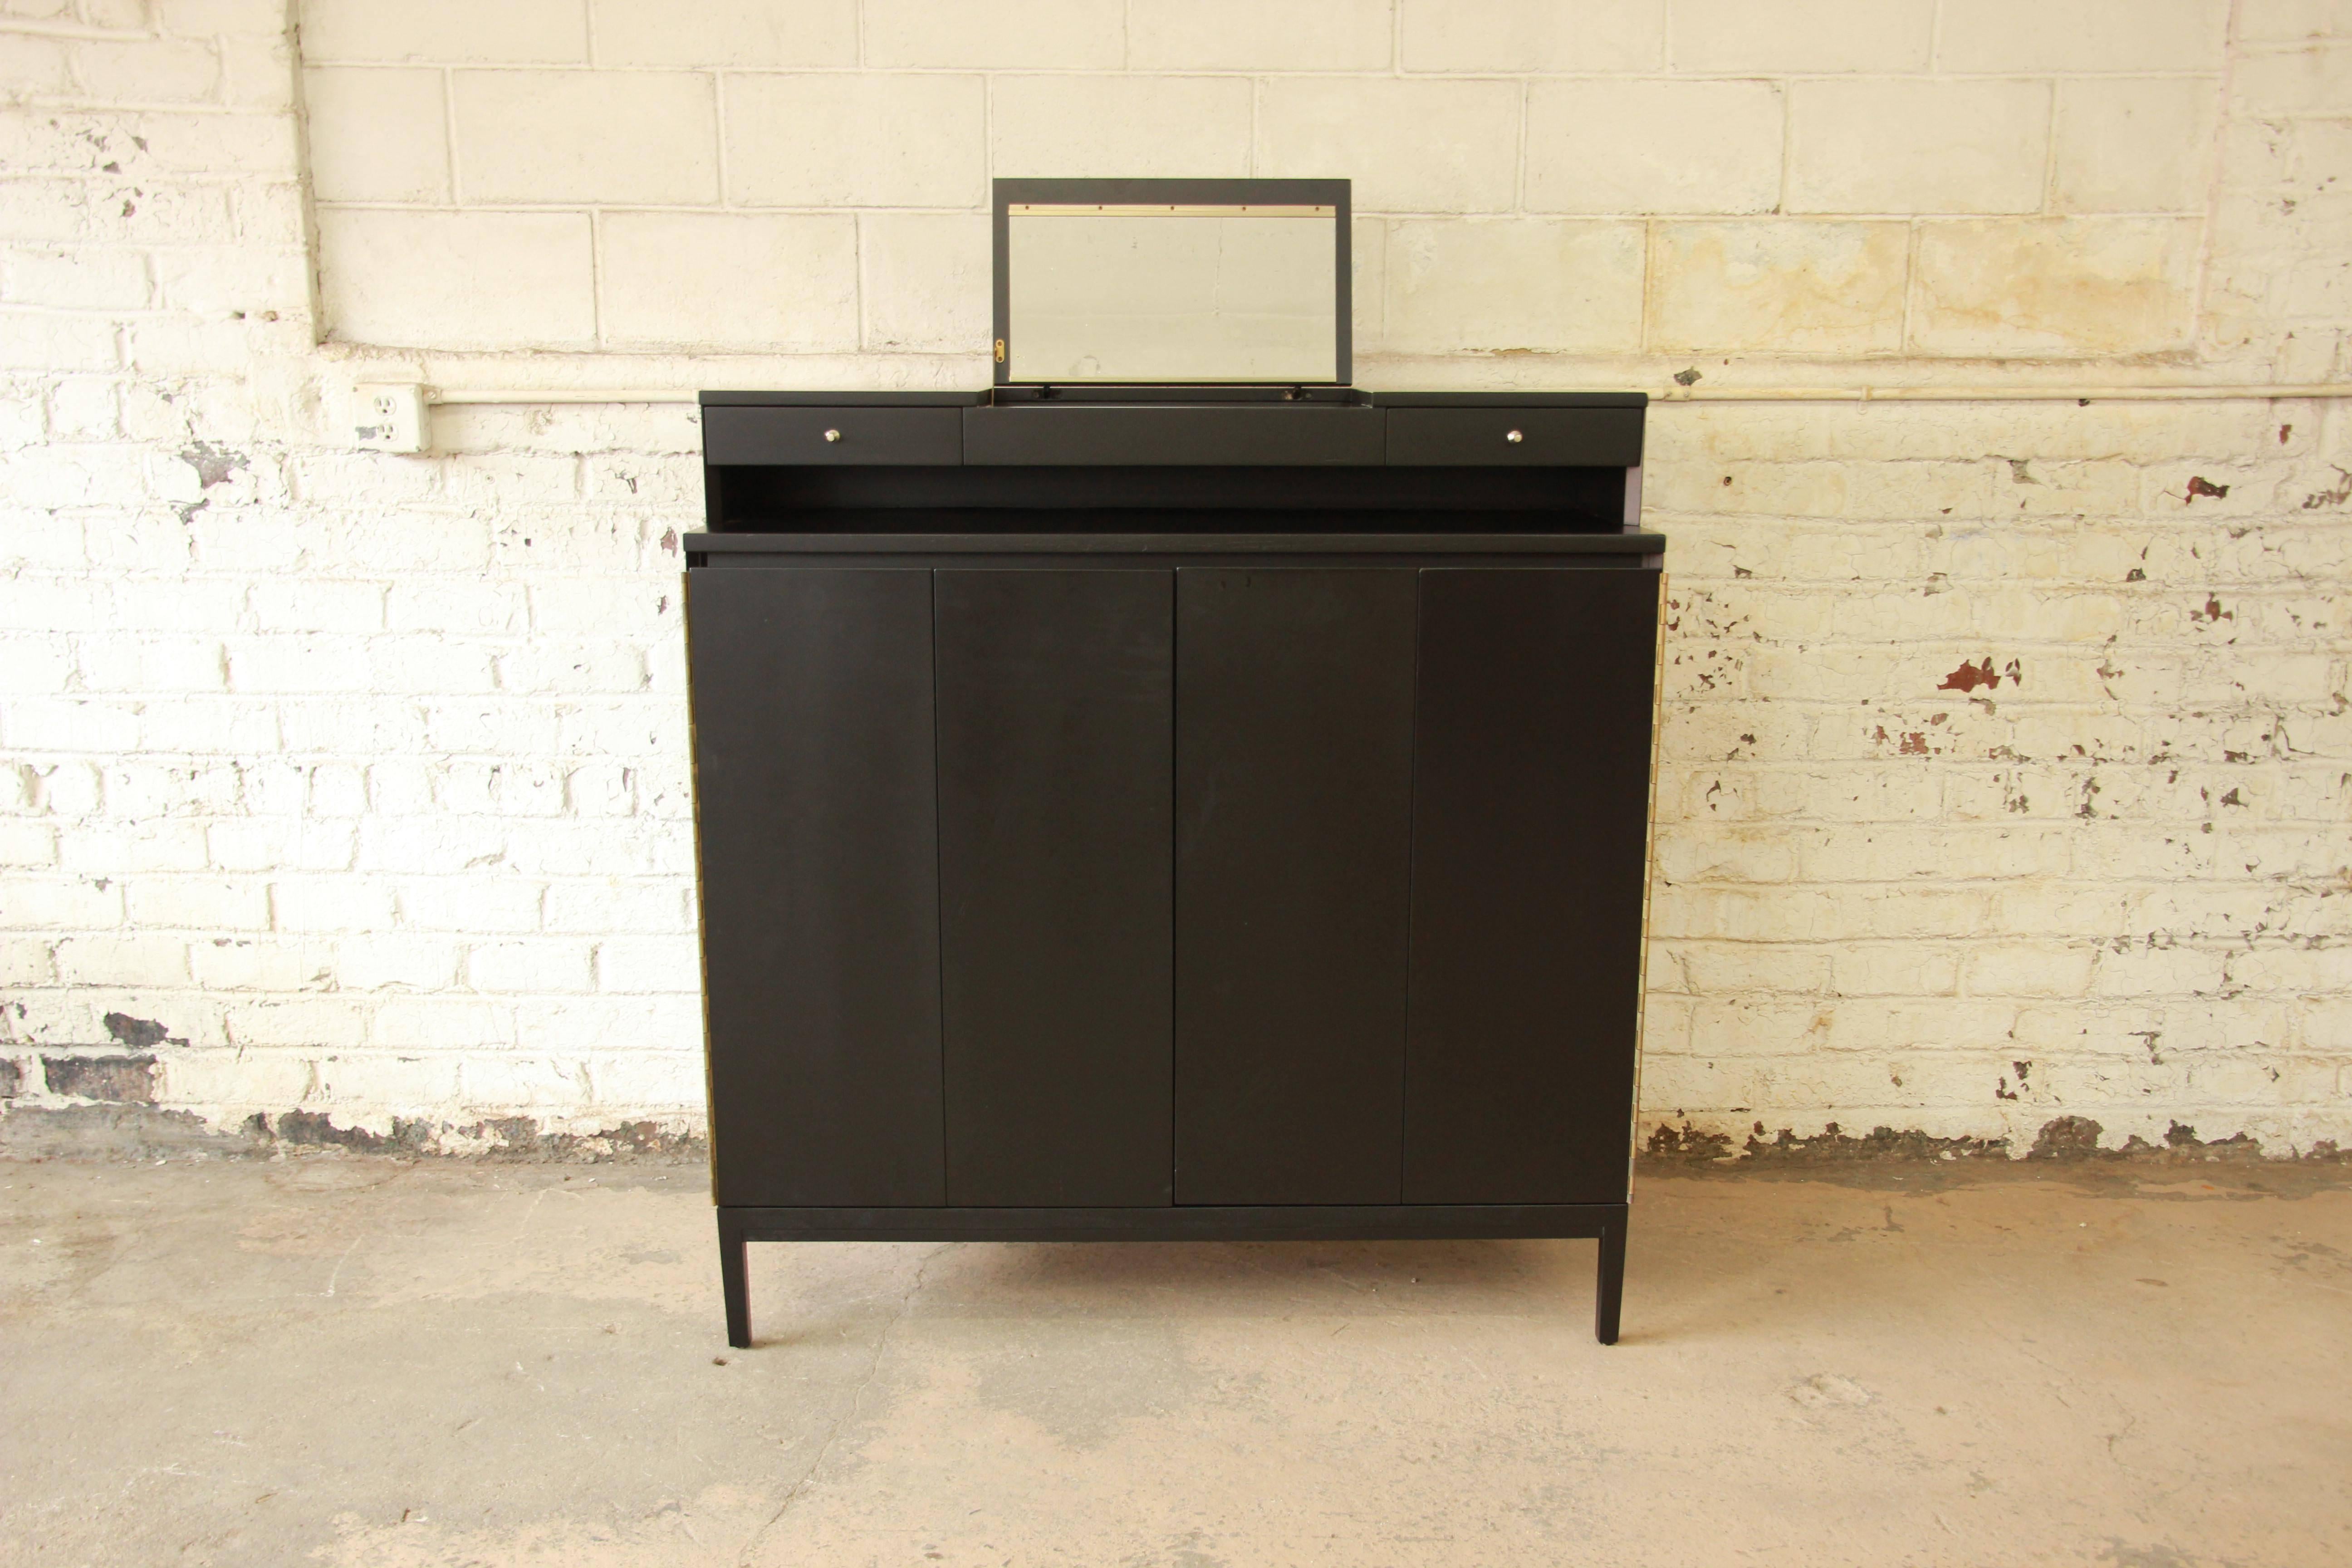 An exceptional Mid-Century Modern black lacquered walnut gentleman's chest, designed by Paul McCobb for Calvin Furniture's 